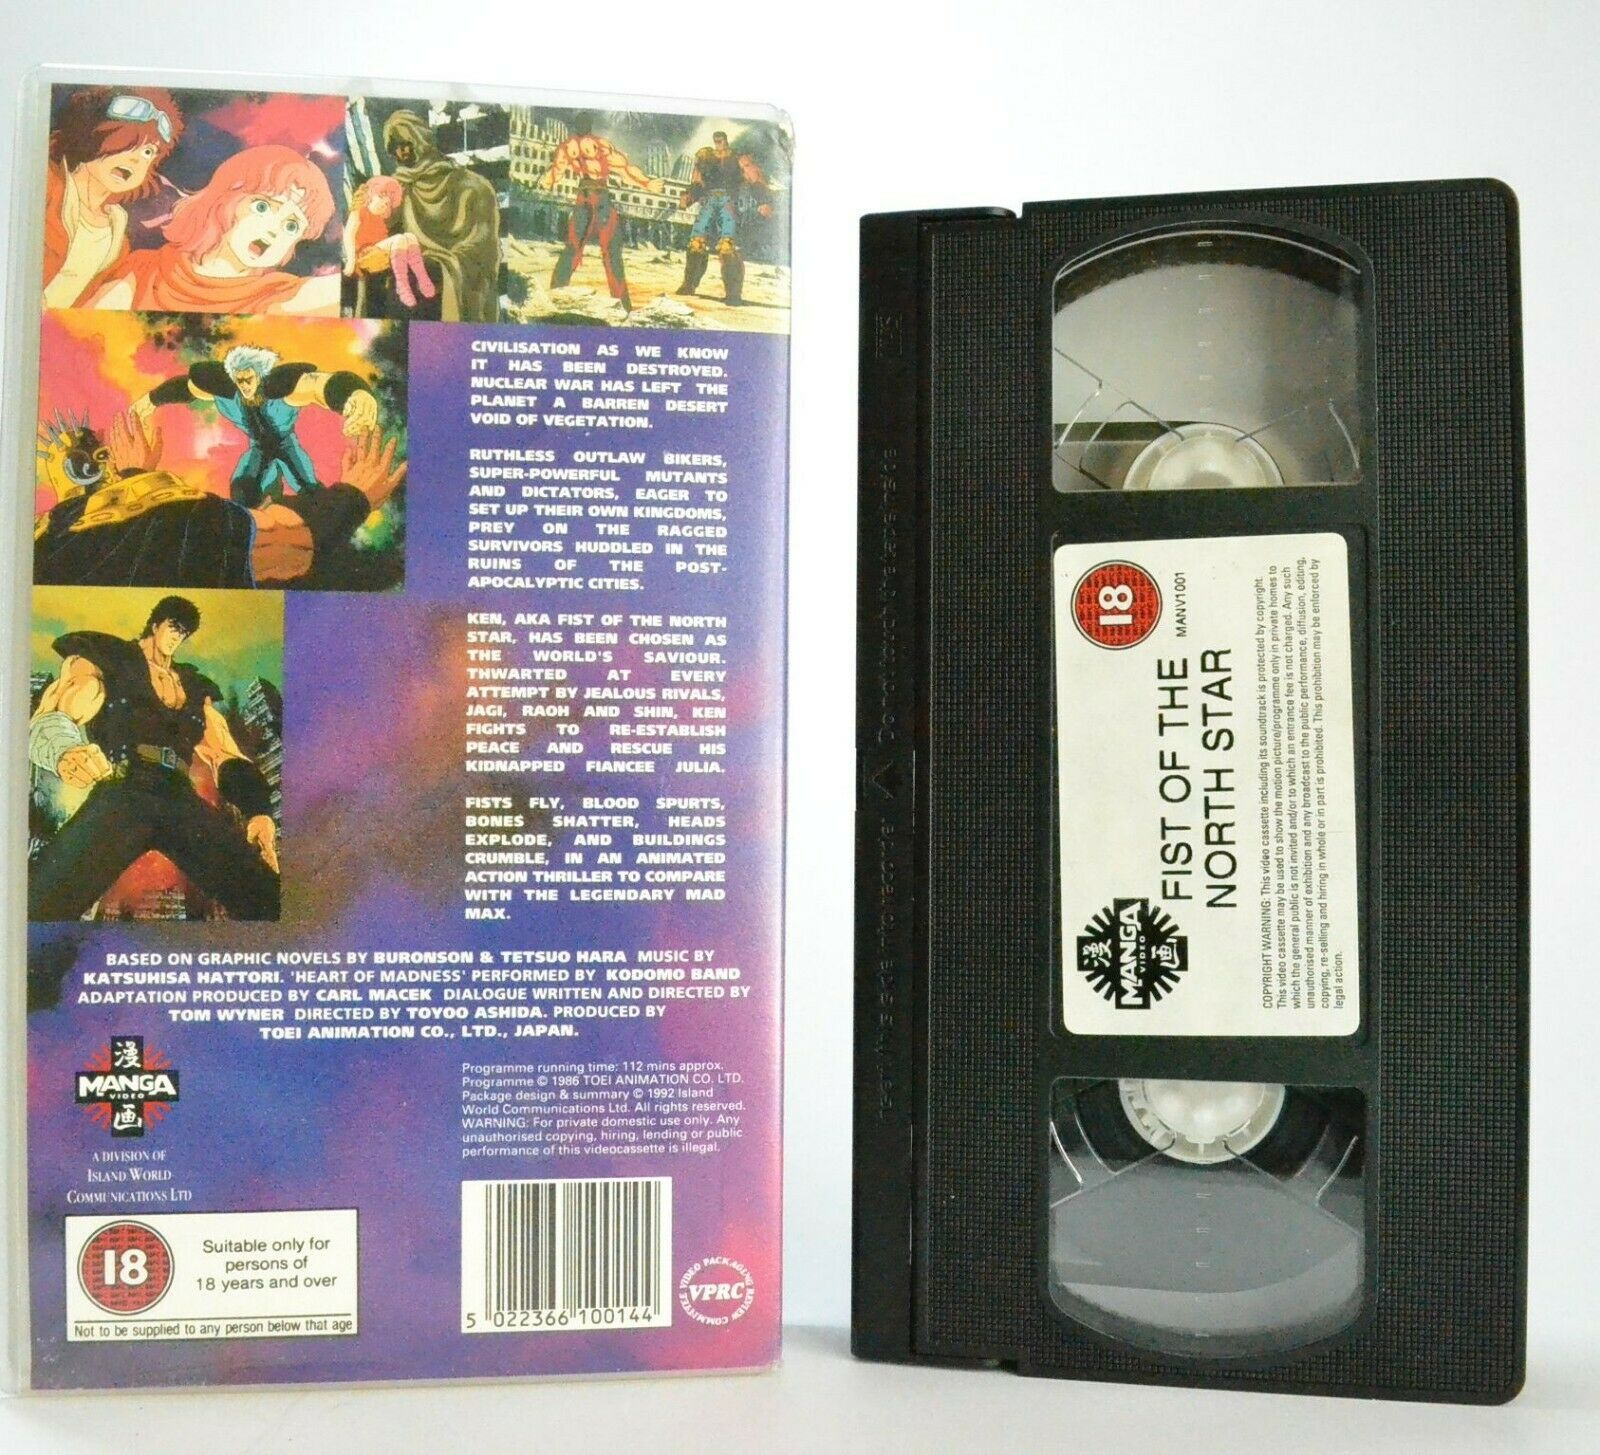 First Of The North Star: Animated Thriller - World After Nuclear War - Pal VHS-